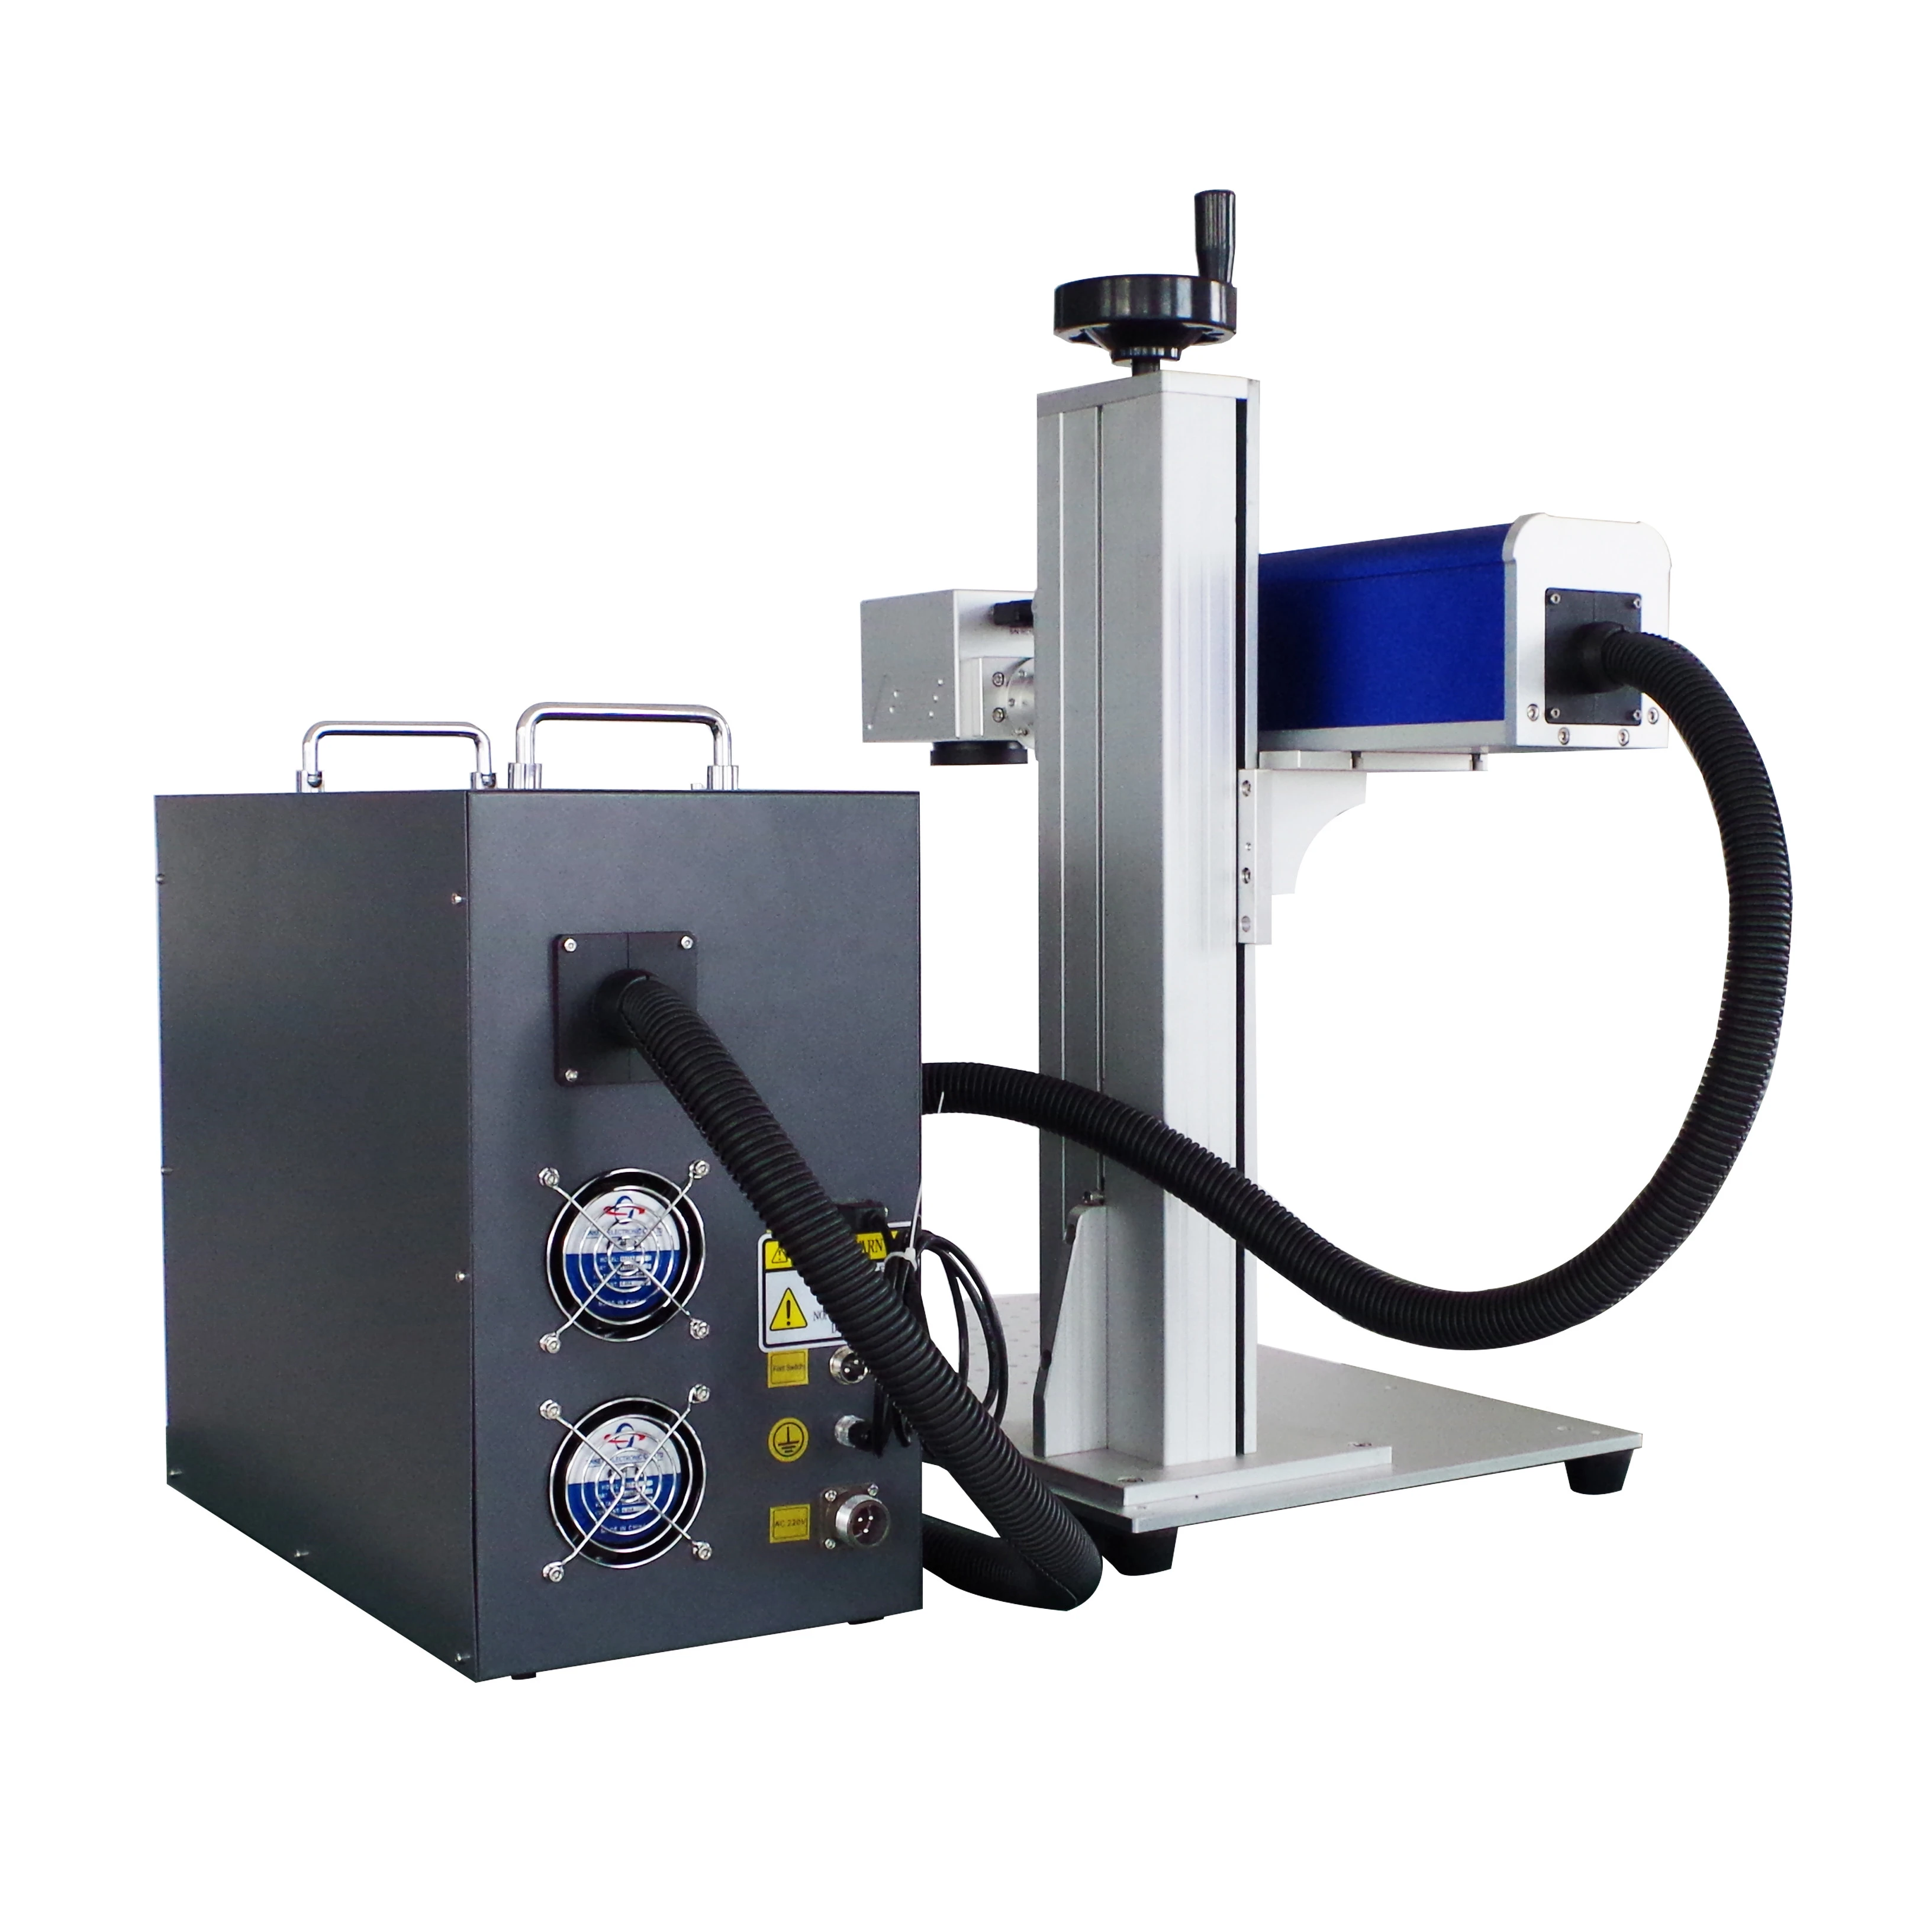 20W 30W 50W Portable Fiber Laser Marking Machine for Jewelry Metal Ring Name Plate Engraving